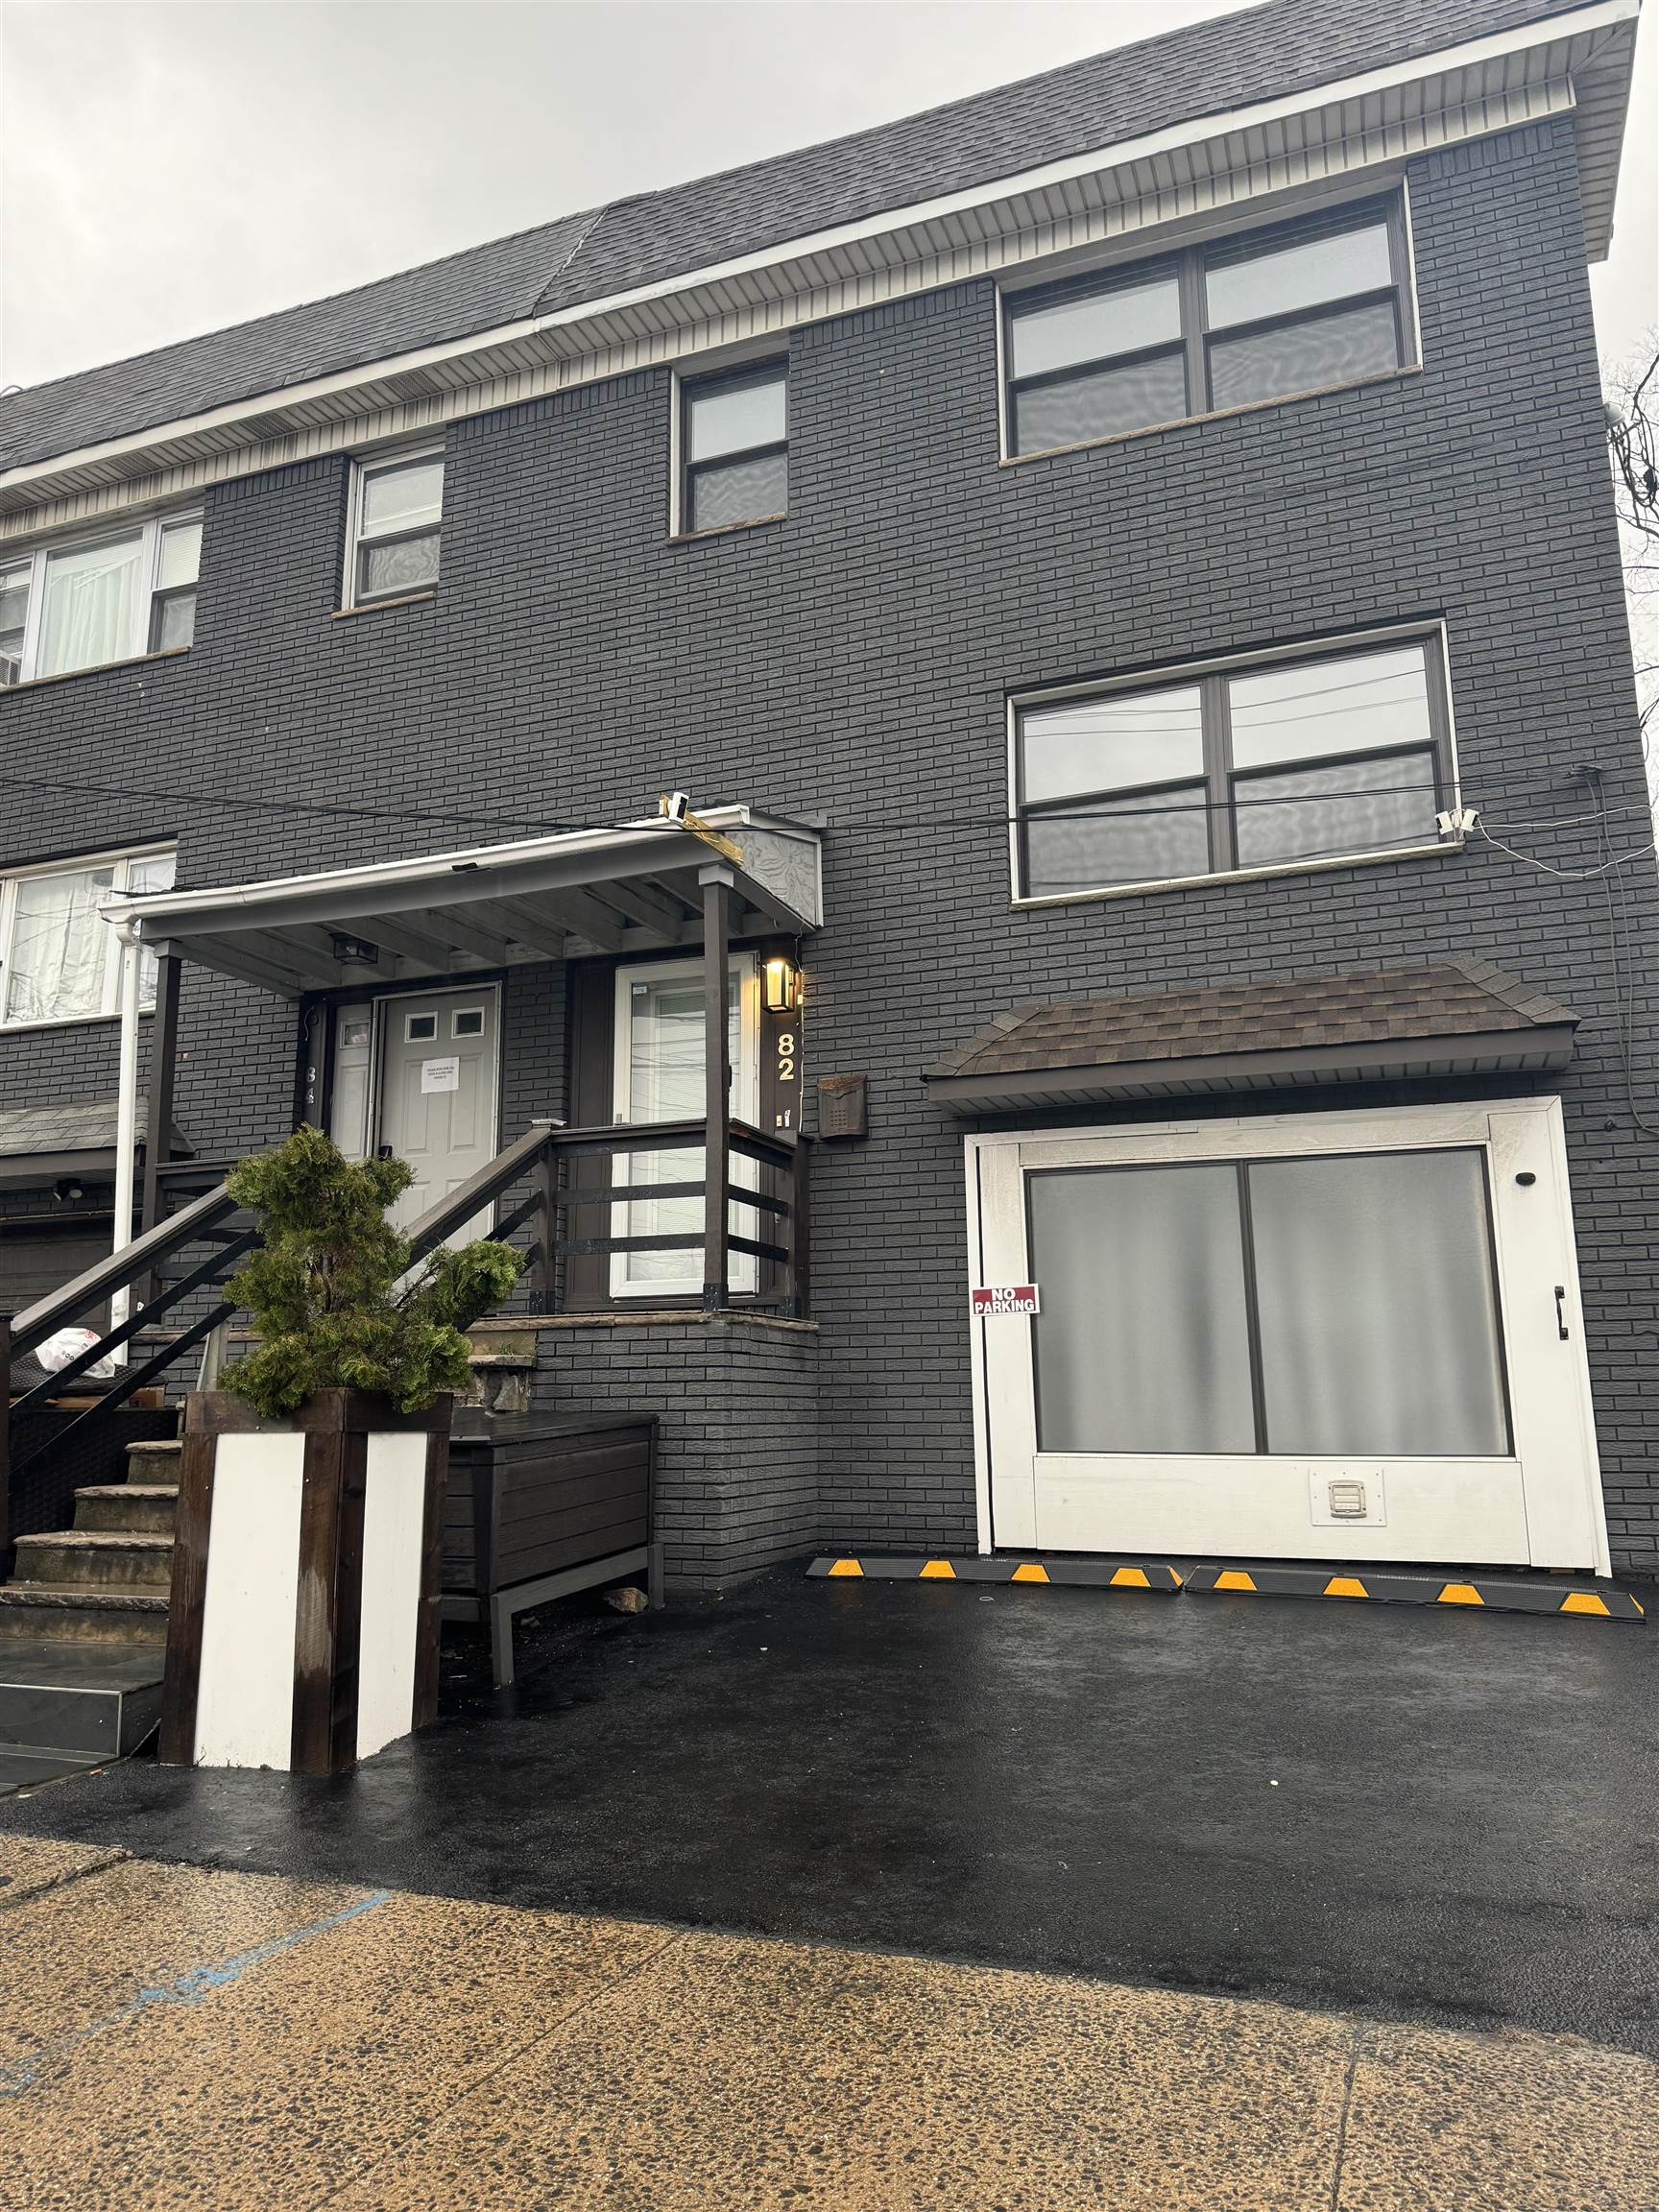 # 240006645 - For Rent in JERSEY CITY - Greenville NJ